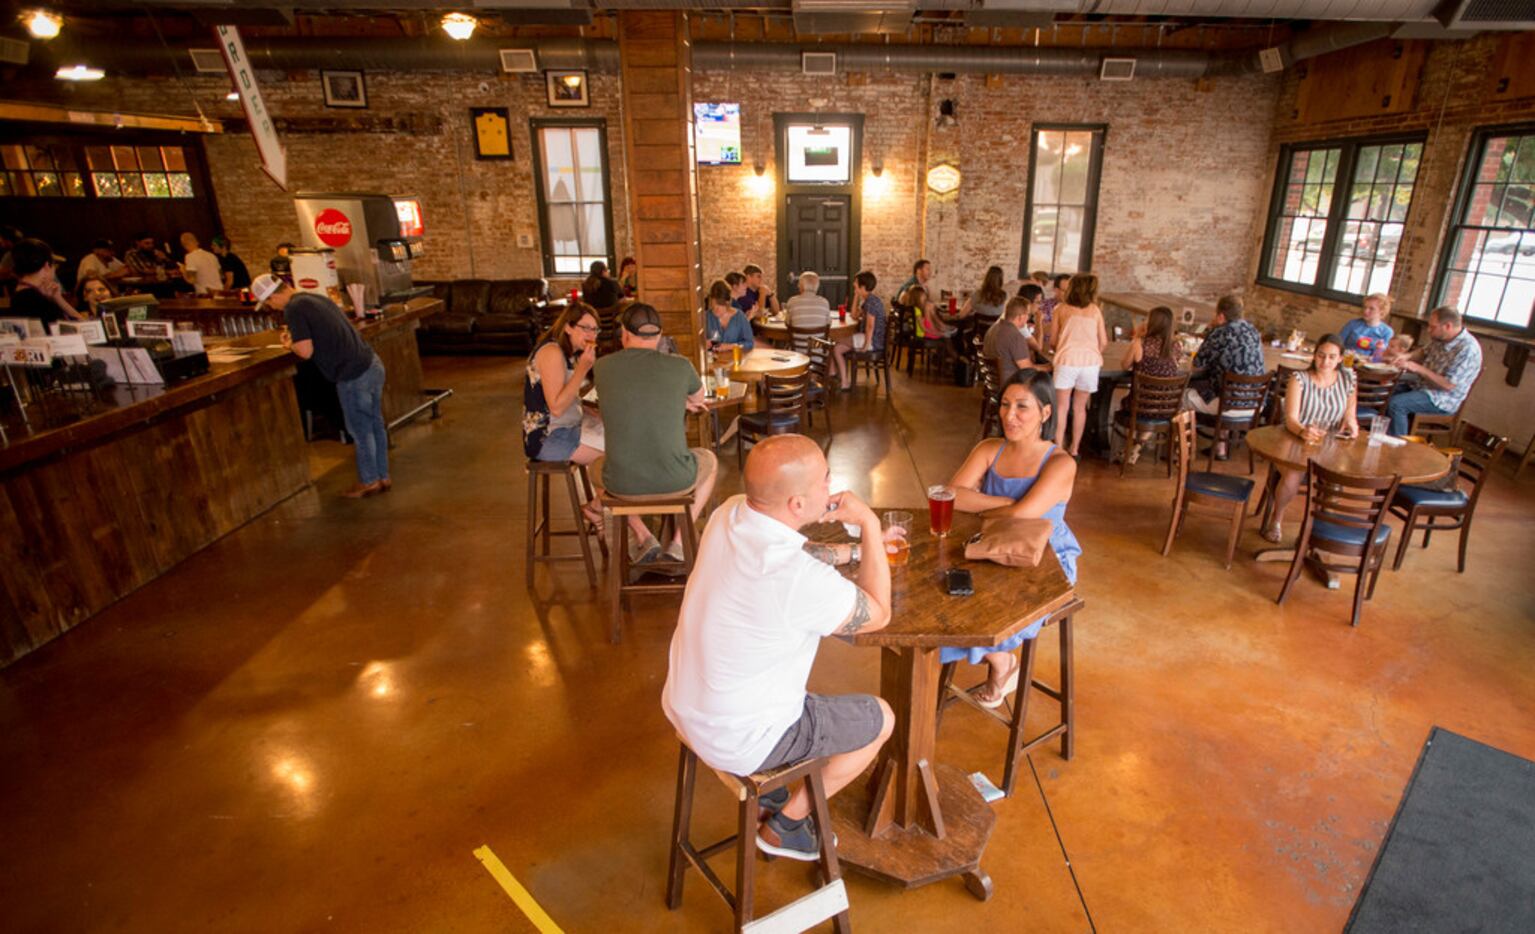 Fort Brewery and Pizza is located in the former home of Chimera Brewing Co. in Fort Worth.